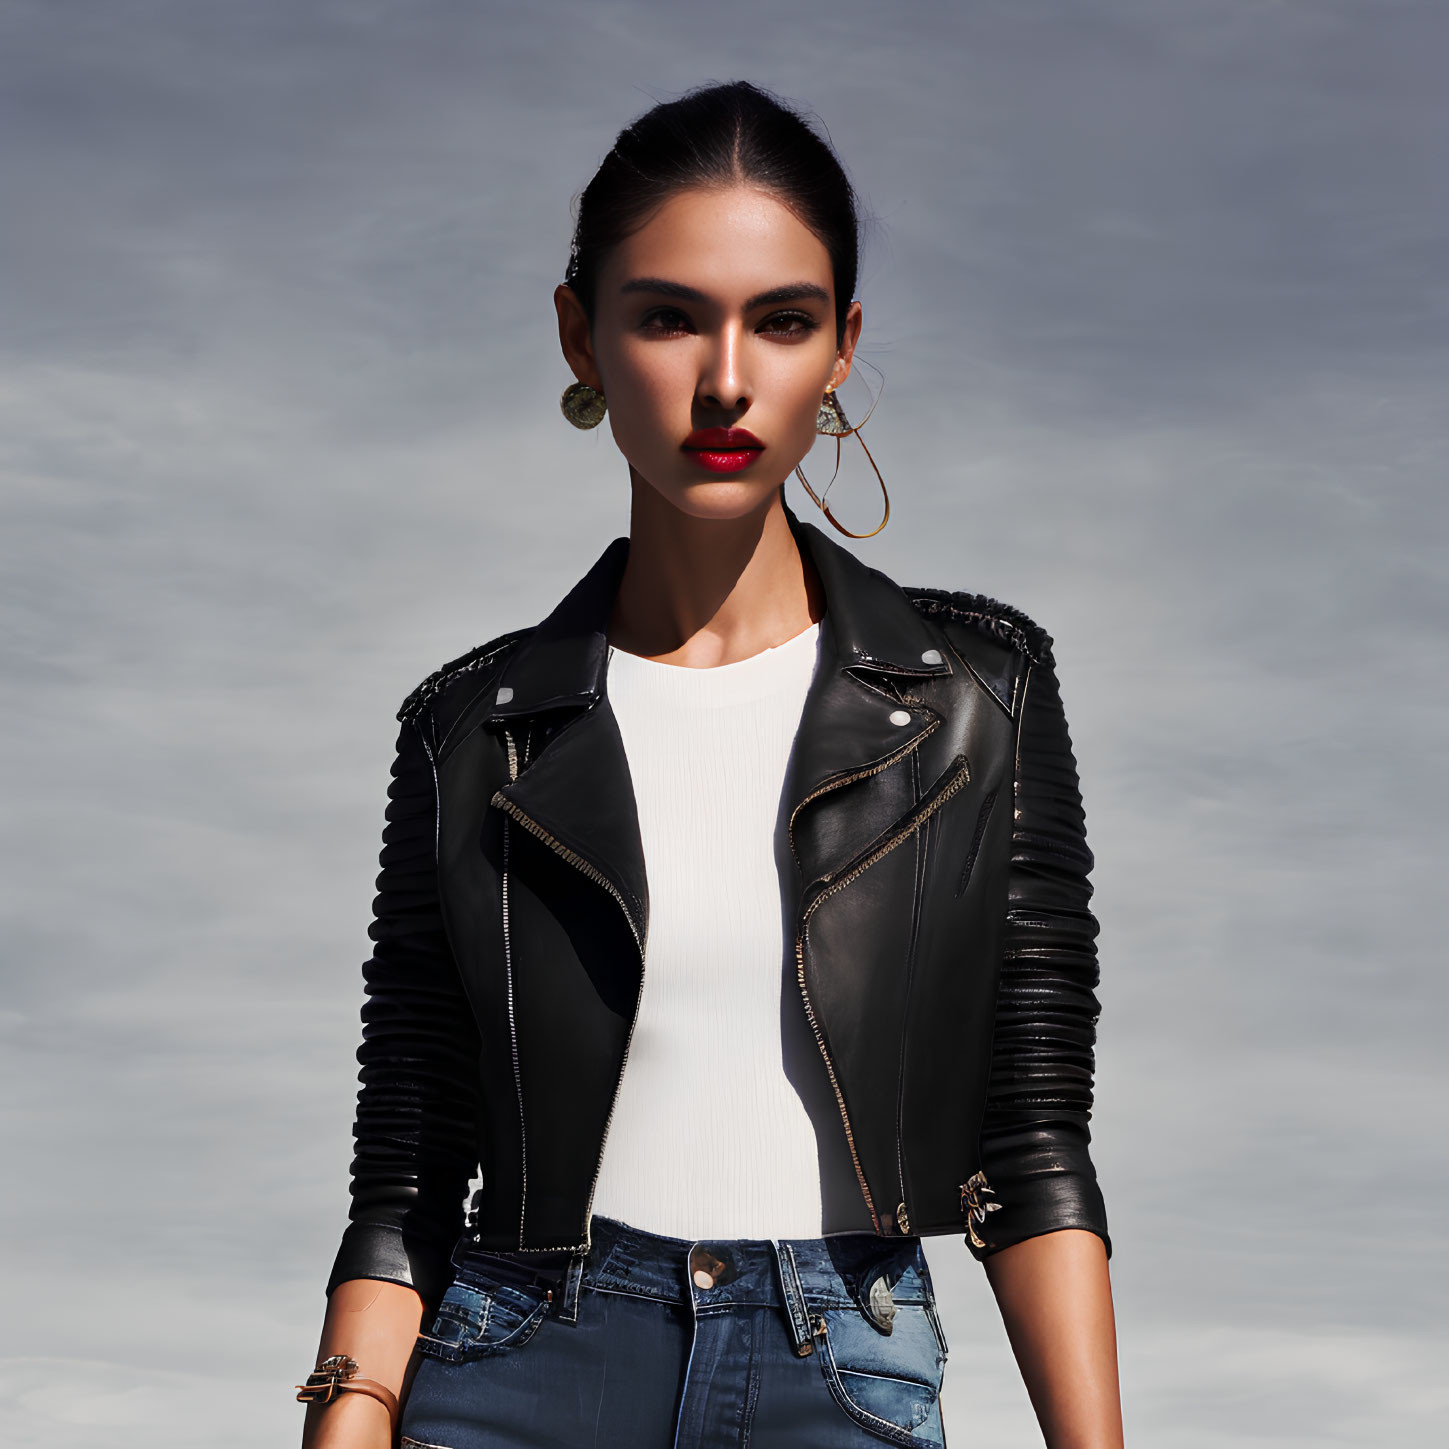 Confident woman in white top, leather jacket, jeans, and hoop earrings against cloudy sky